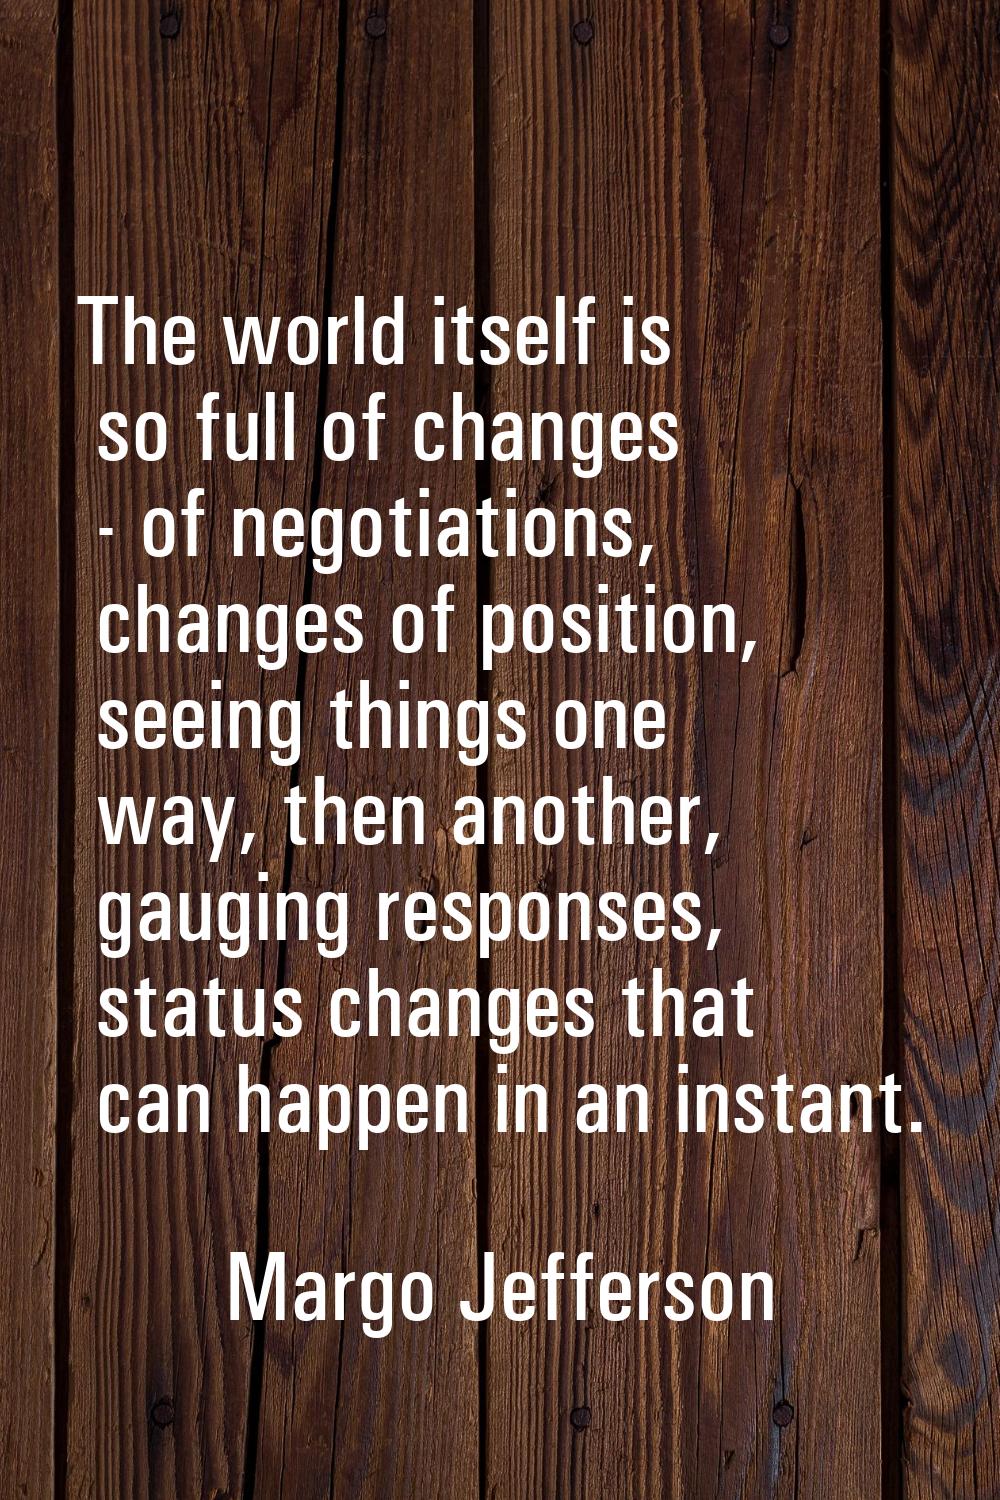 The world itself is so full of changes - of negotiations, changes of position, seeing things one wa